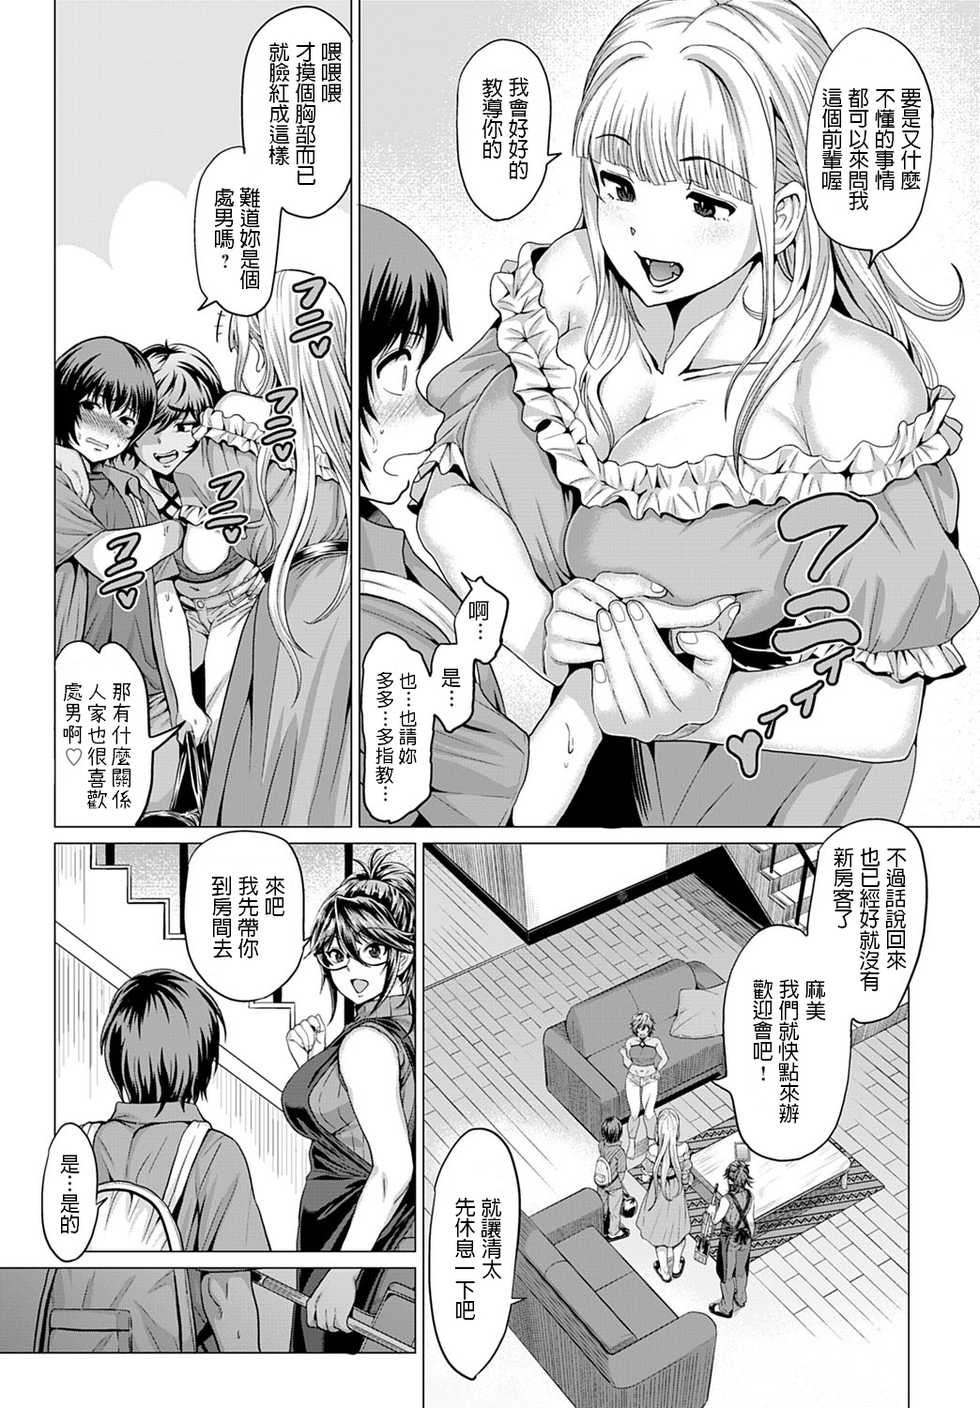 [Chicken] Succubus Share House e Youkoso! (COMIC Anthurium 2020-01) [Chinese] [Digital] - Page 3